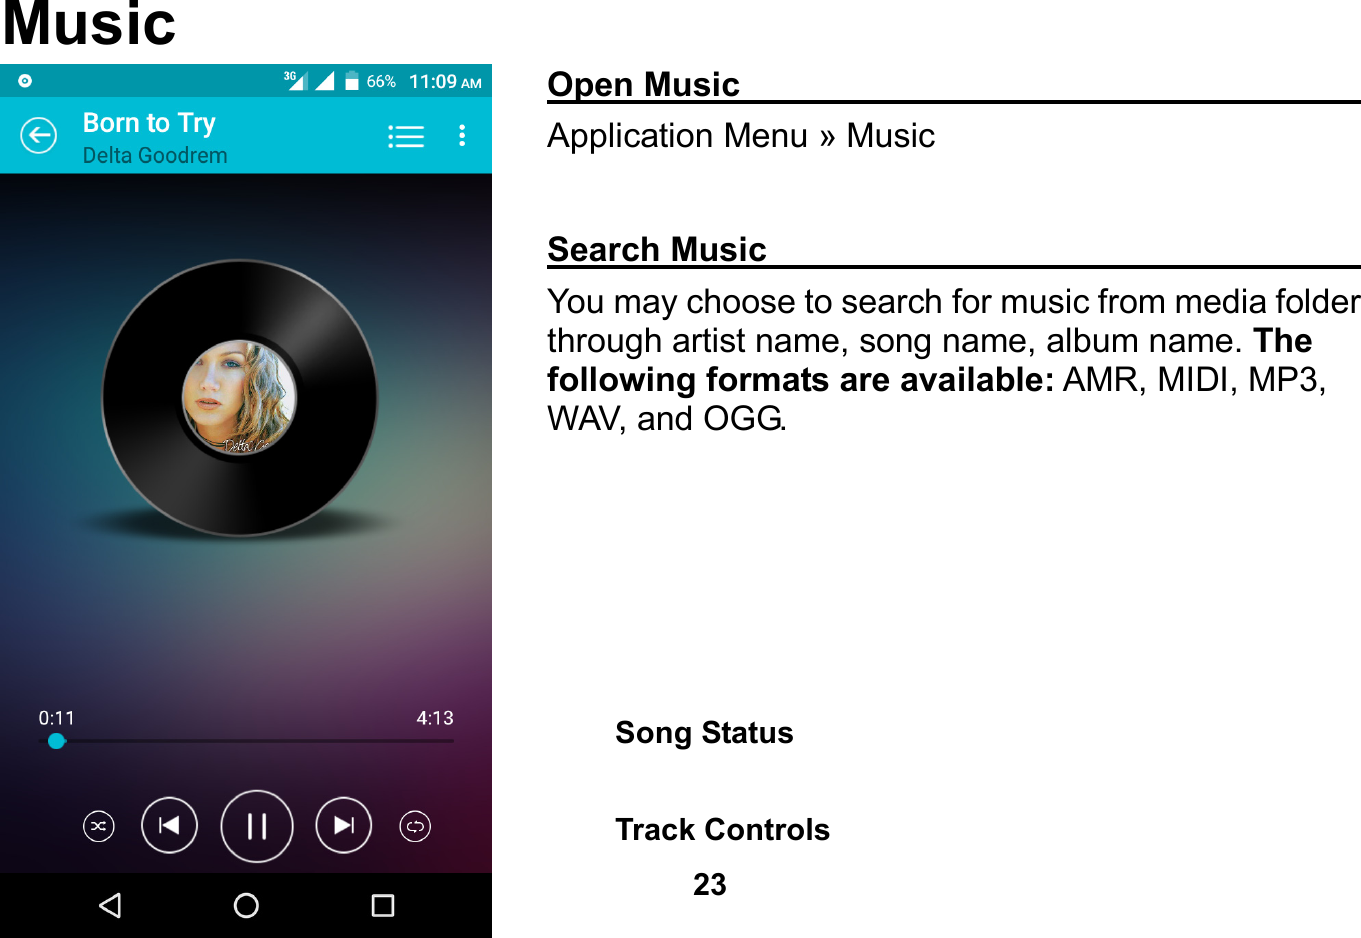   23   Music Open Music                                                  Application Menu » Music  Search Music                                                You may choose to search for music from media folder through artist name, song name, album name. The following formats are available: AMR, MIDI, MP3, WAV, and OGG.   Song Status       Track Controls 